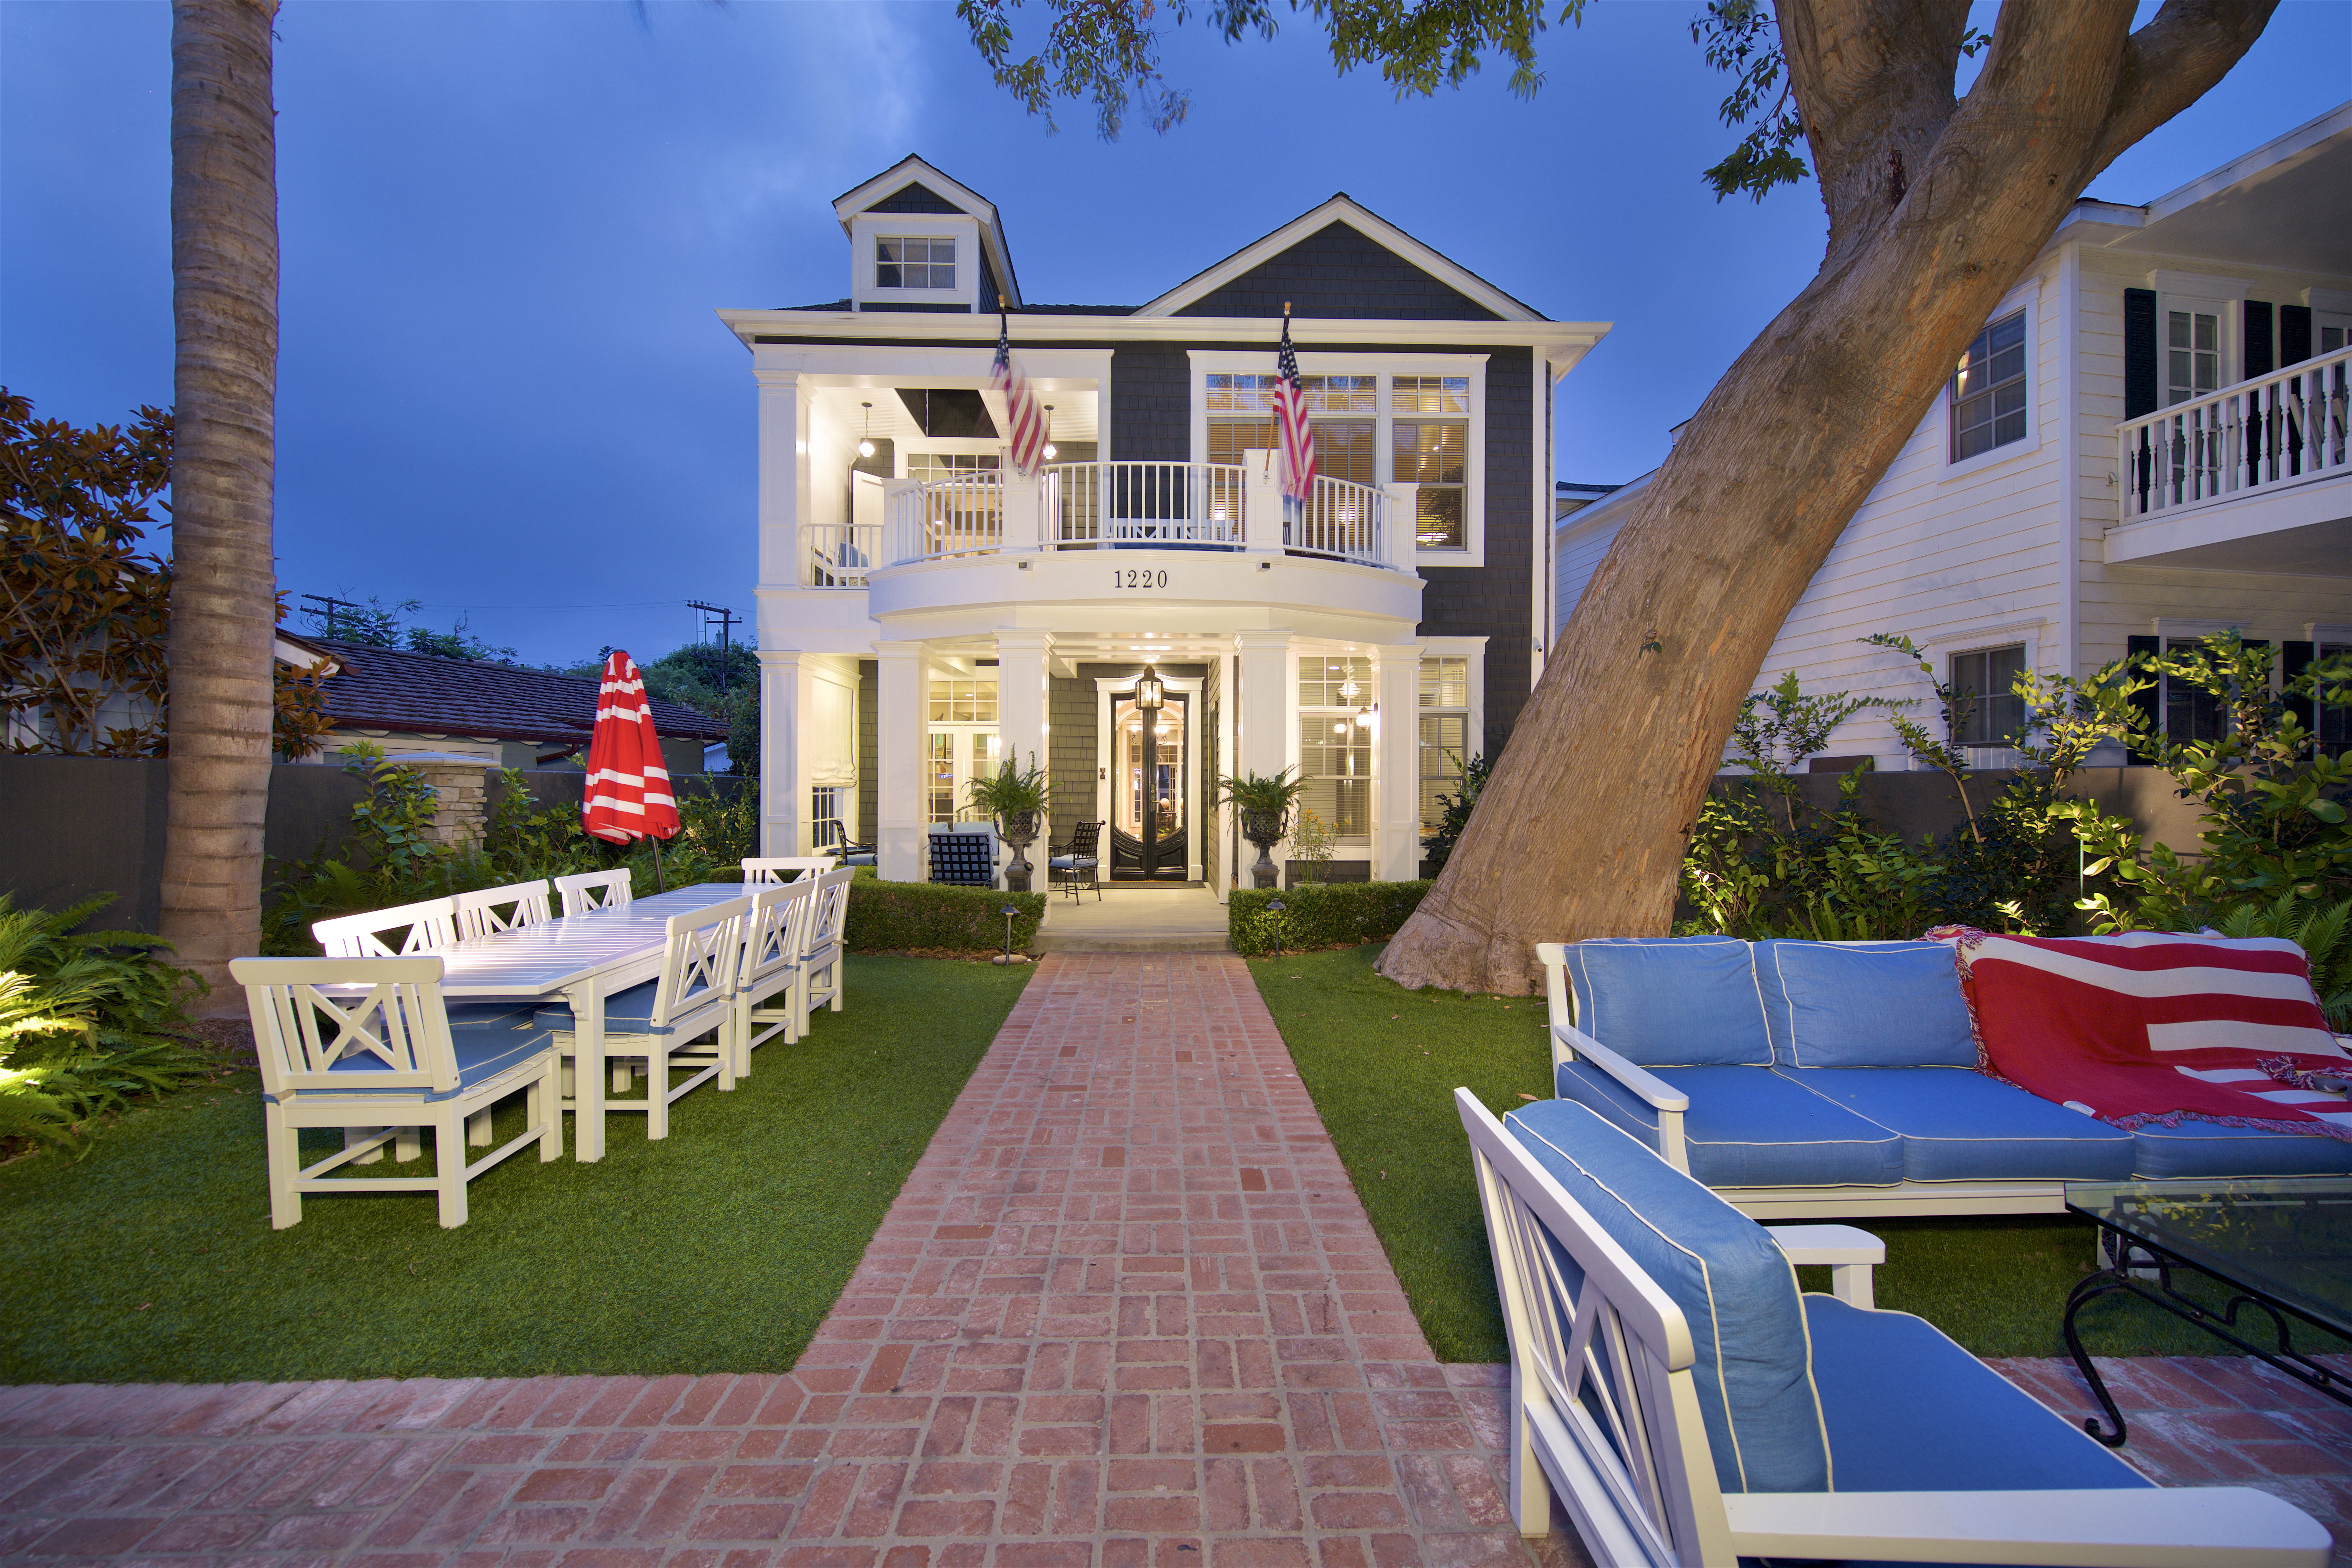 Coronado home exterior with manicured landscaping and welcoming front porch